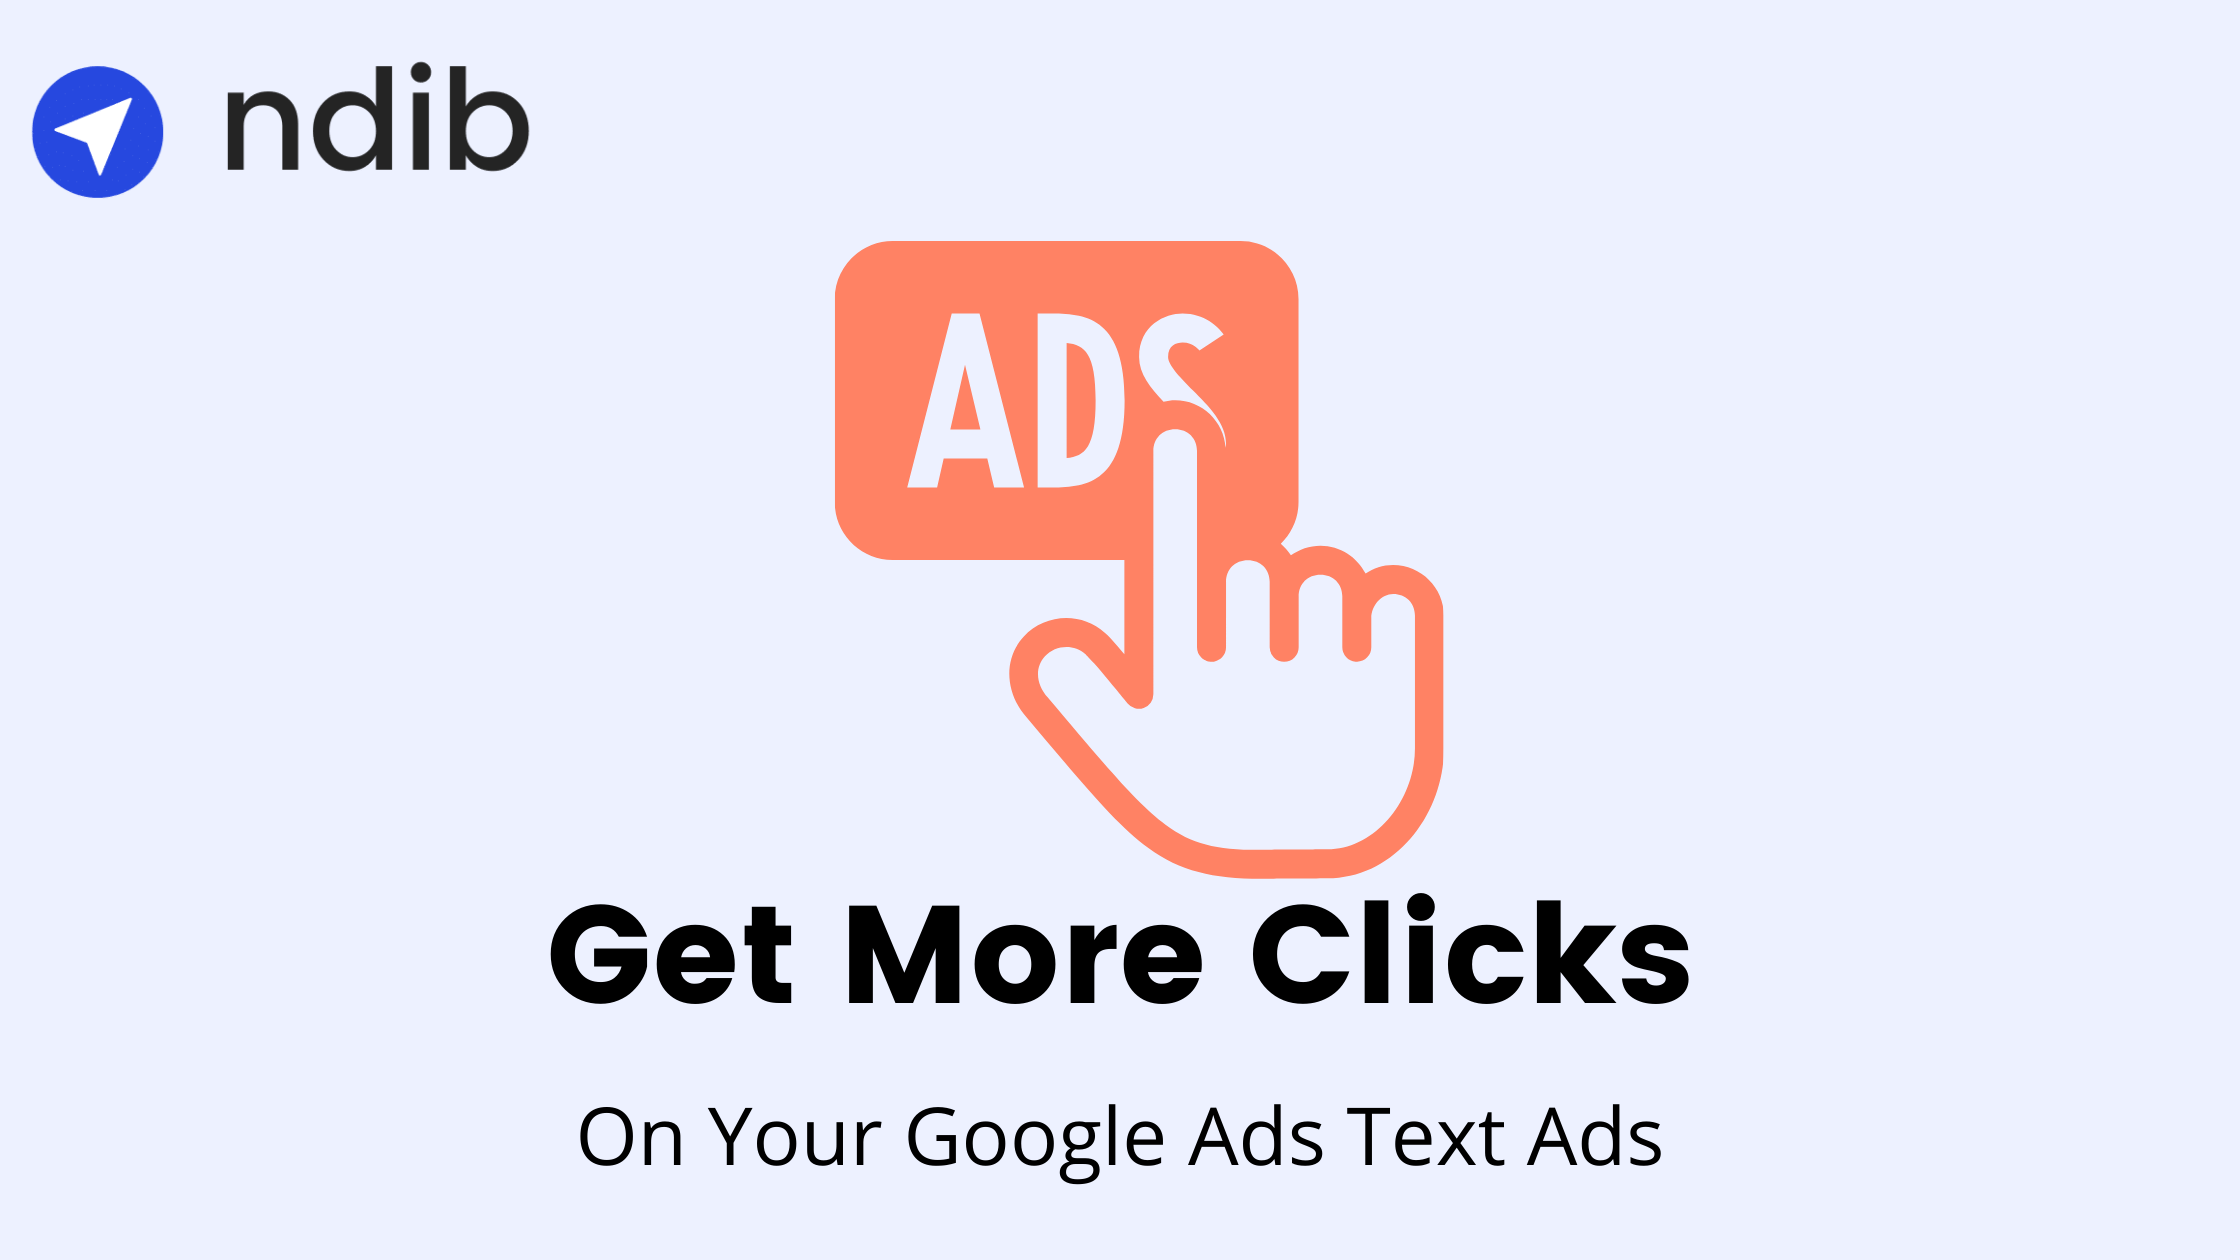 Get Clicks On Your Google Ads Text Ads